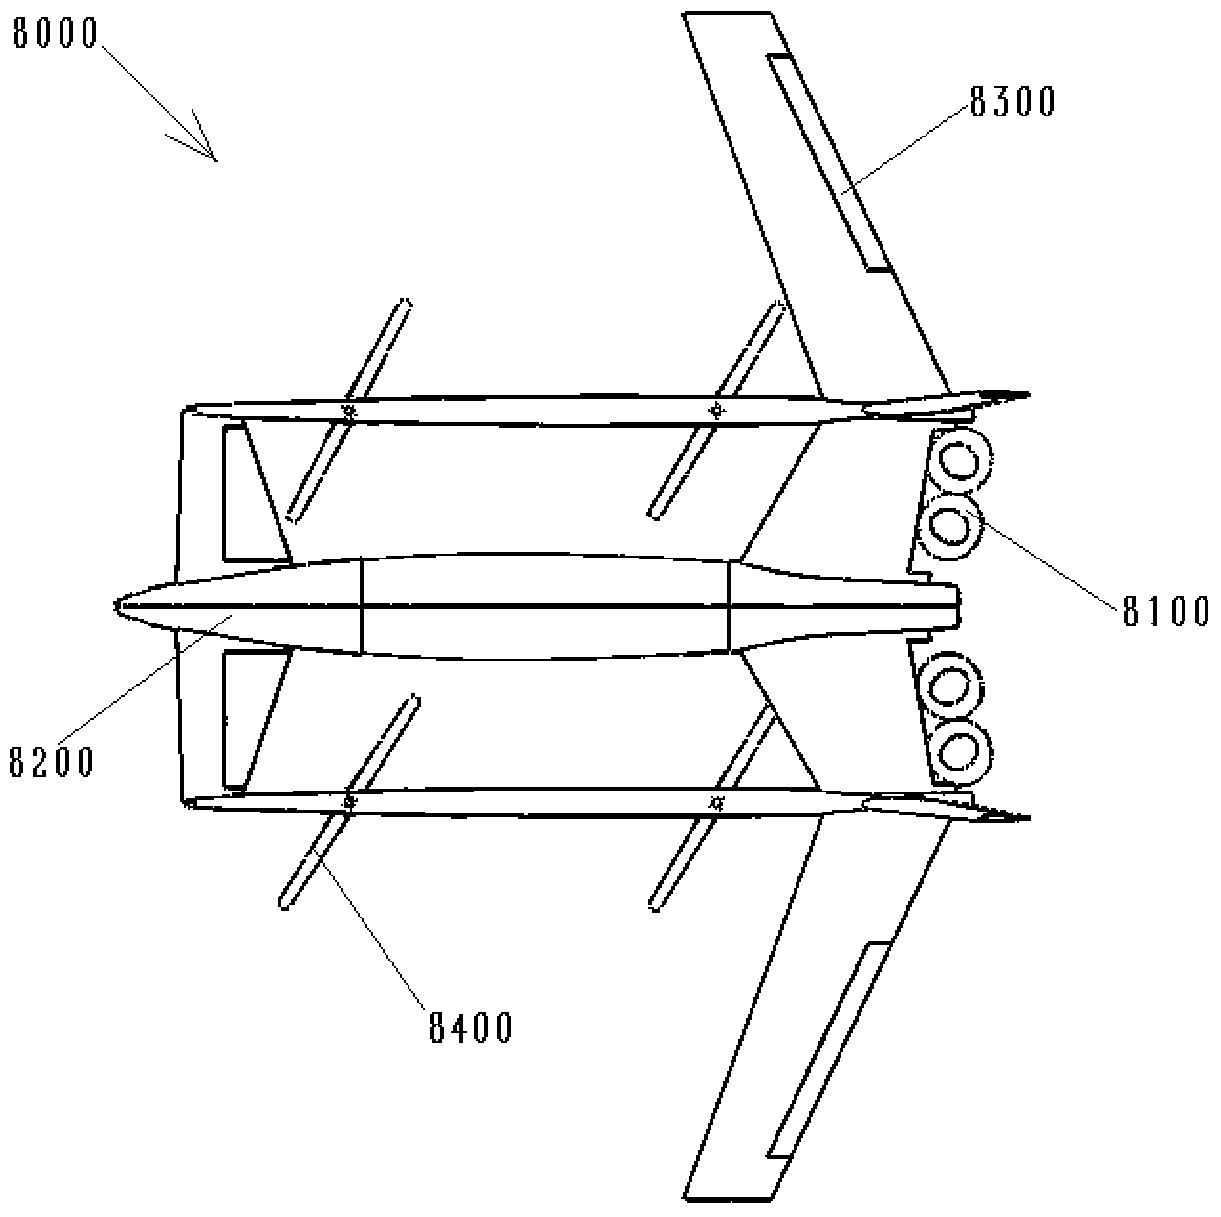 Combined type aircraft adopting rotors and vector propulsion system